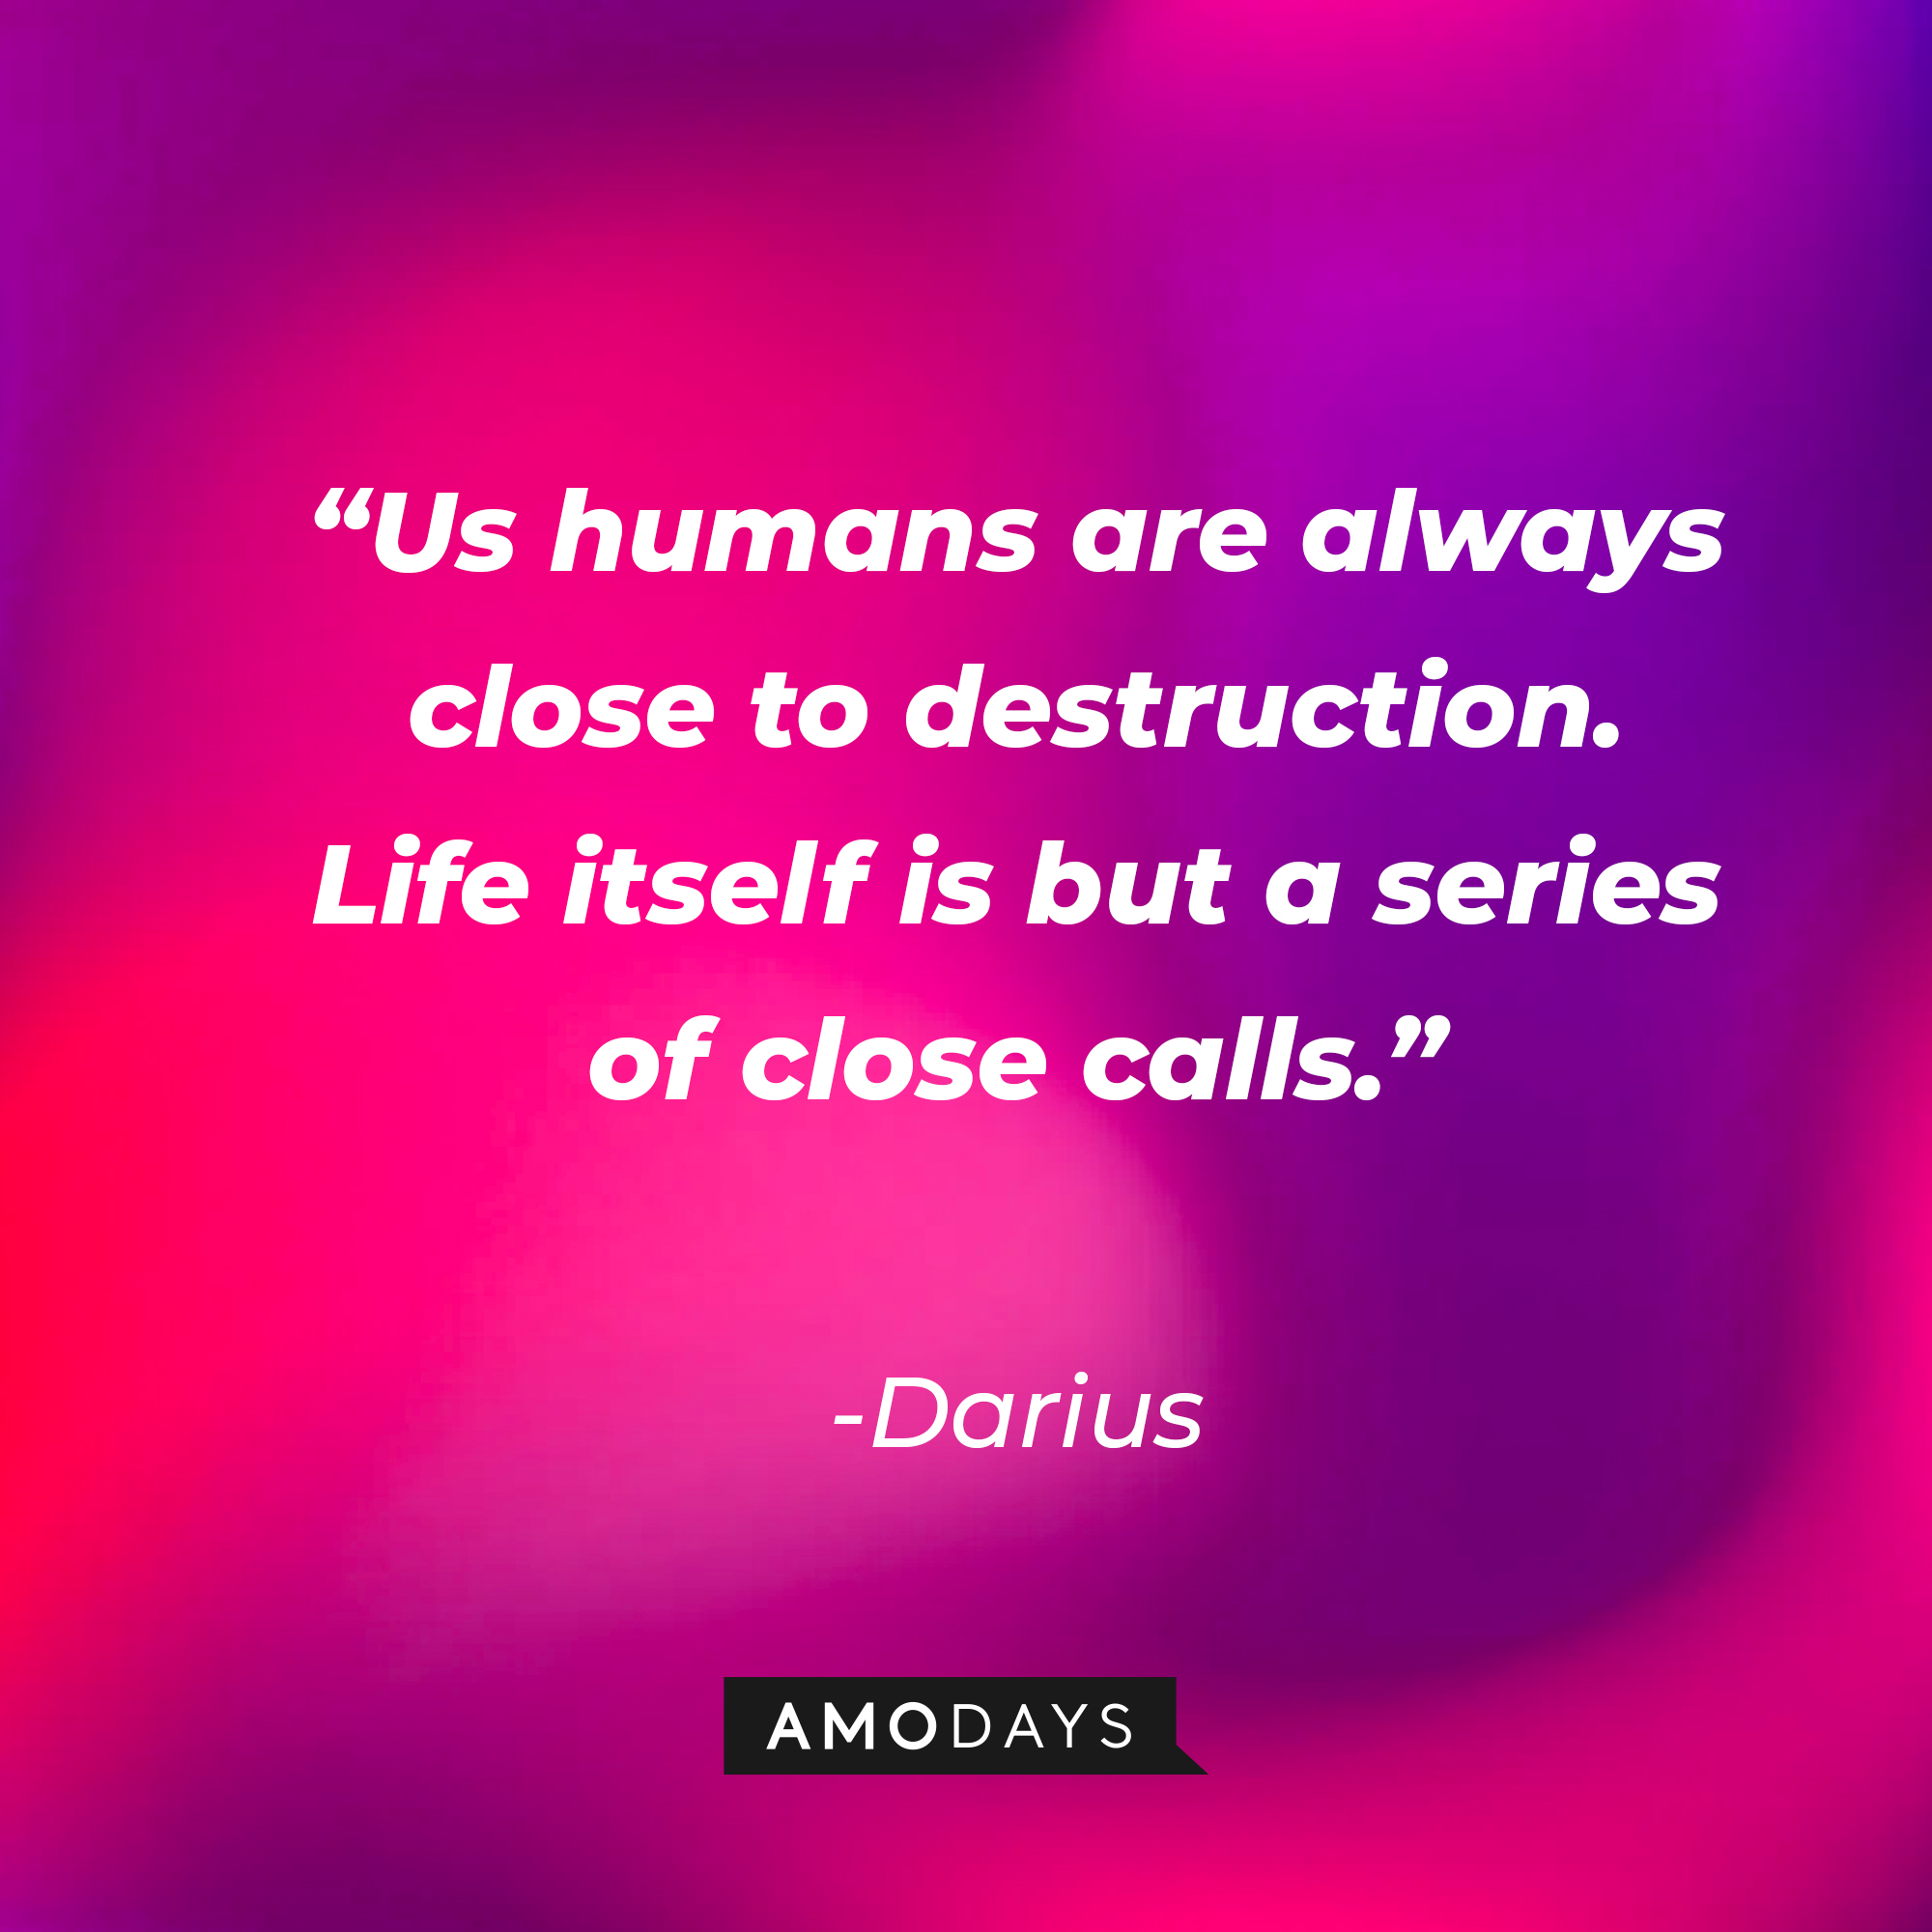 Darius’ quote: “Us humans are always close to destruction. Life itself is but a series of close calls.” | Source: AmoDays